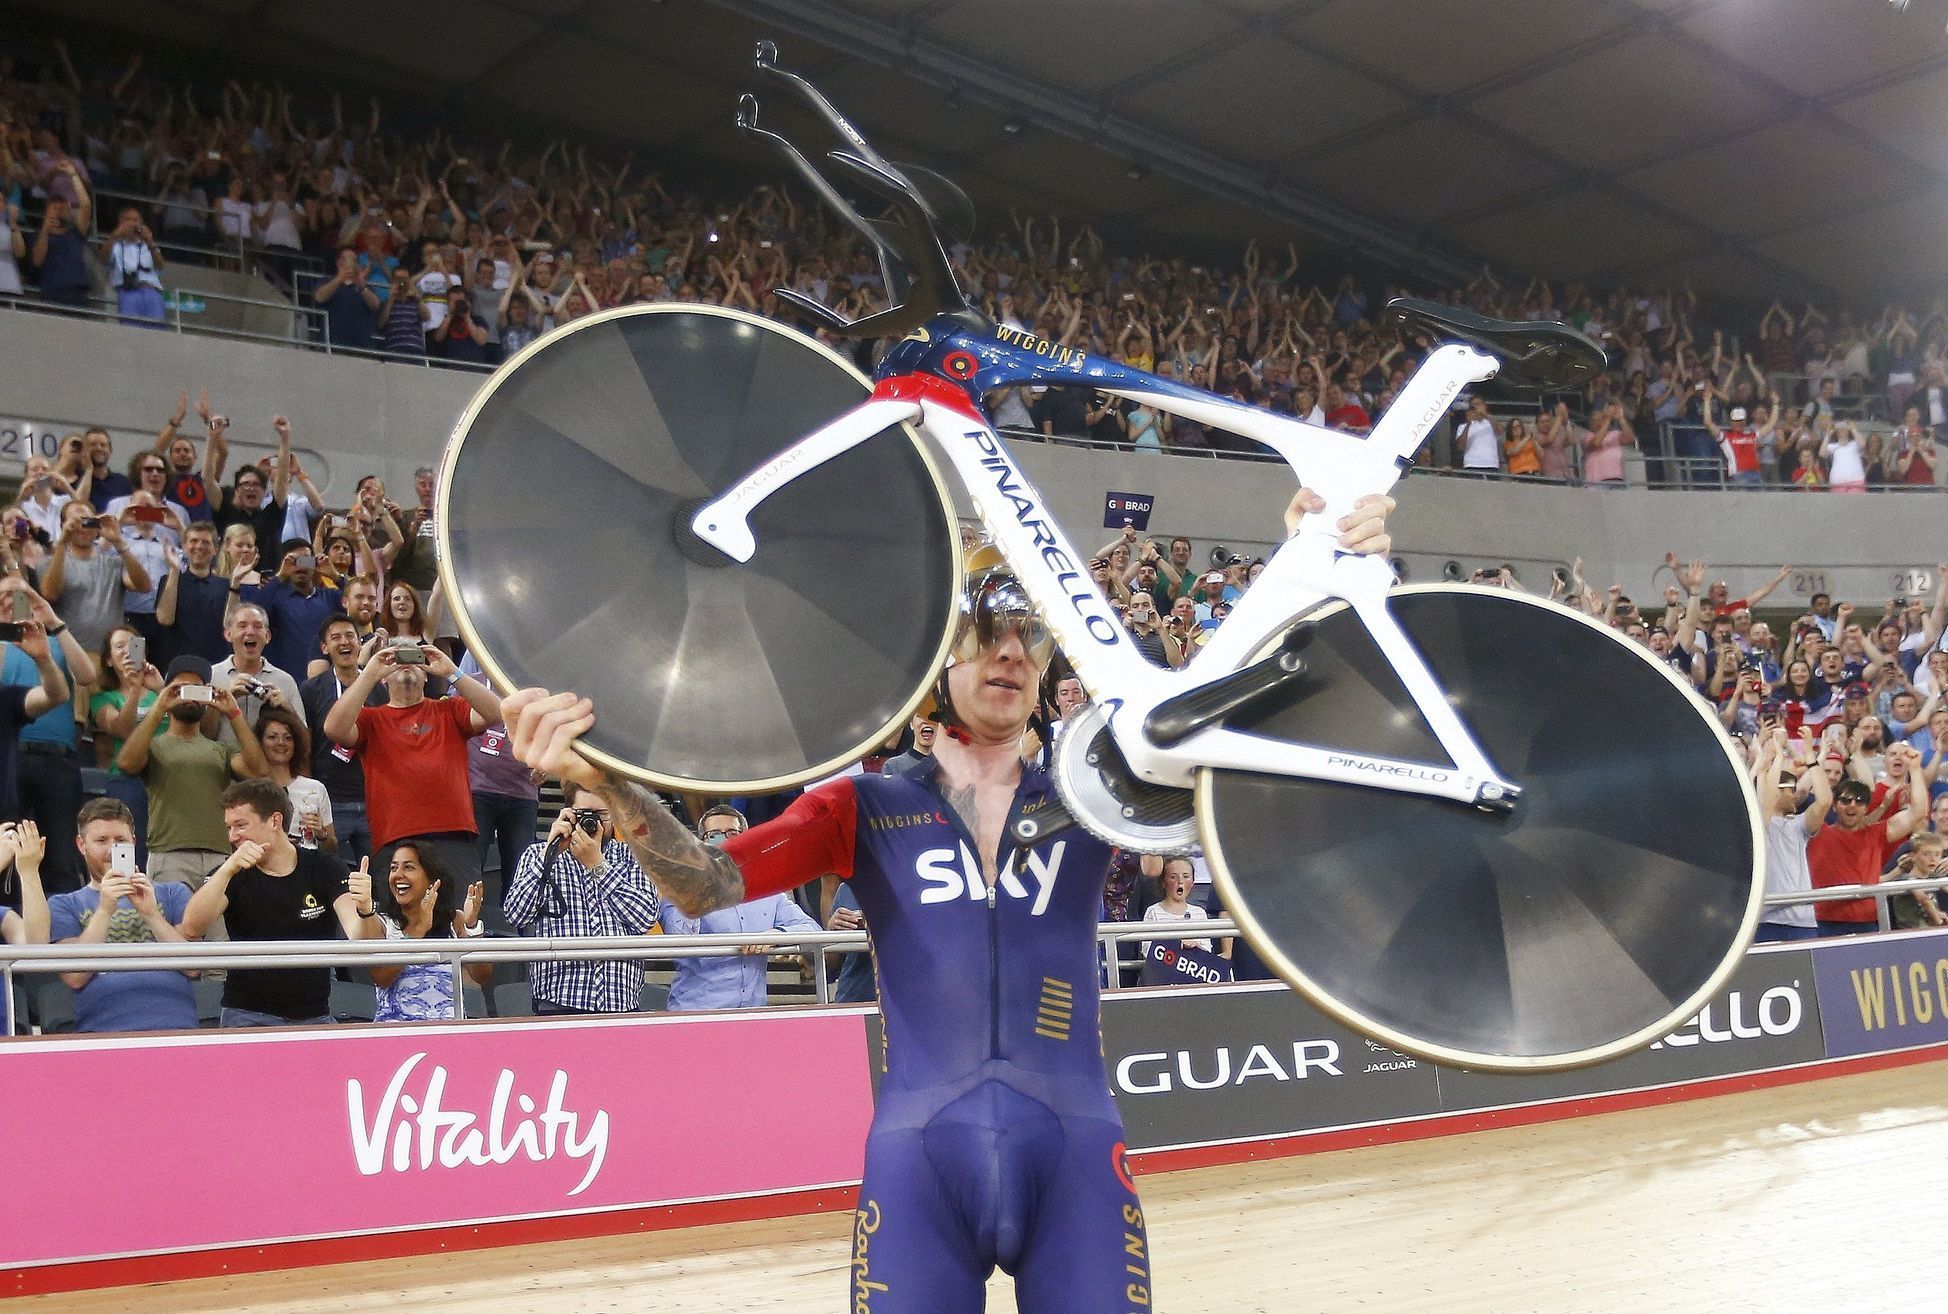 Bradley Wiggins picks up his bicycle as he celebrates after breaking cycling's hour record at the Olympic velodrome in East London, Britain